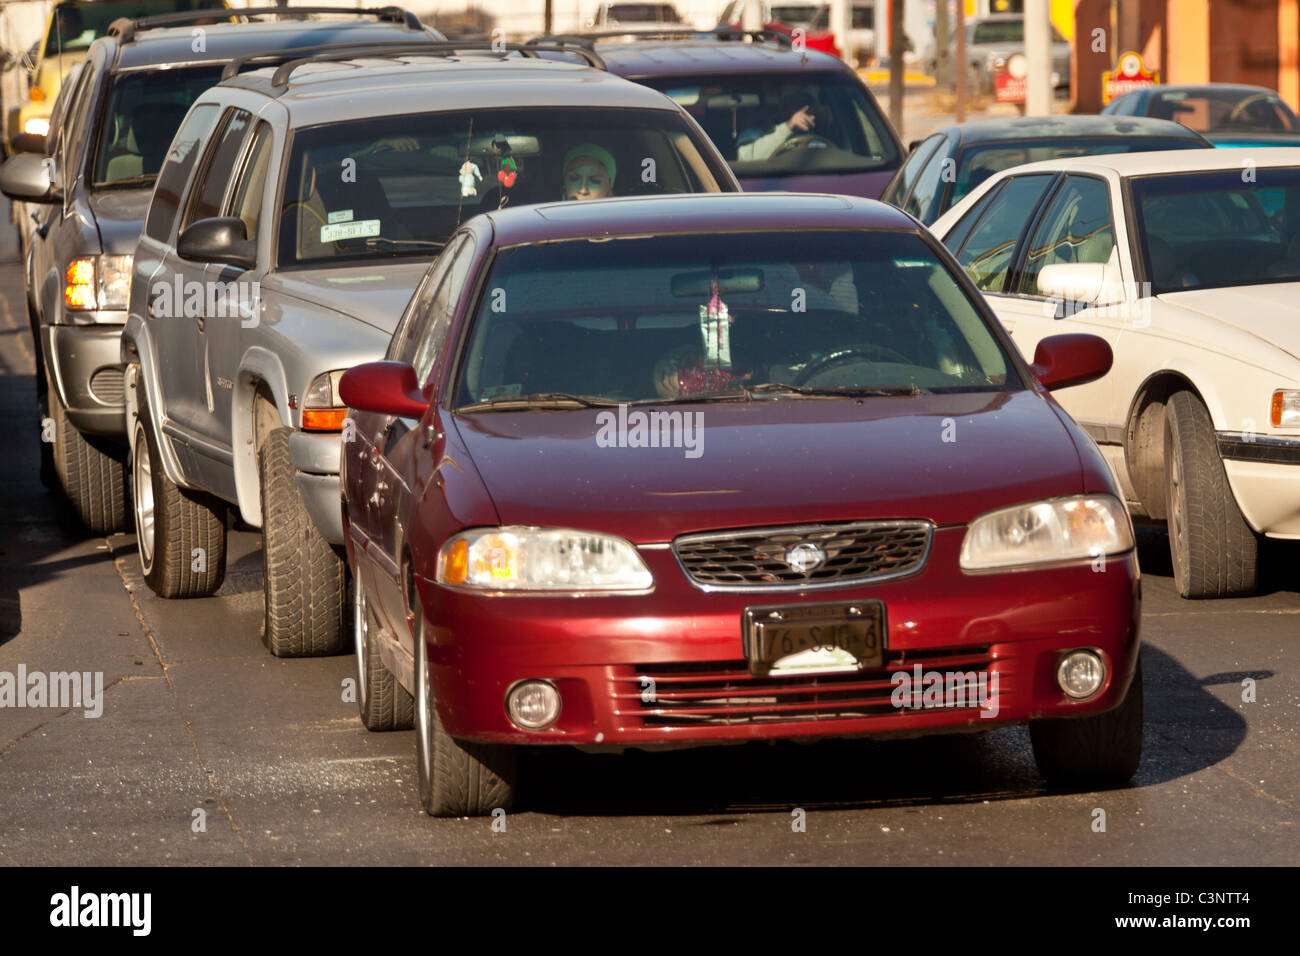 Traffic stops behind a vehicle of a driver executed moments earlier in the drug war Juarez, Mexico Stock Photo